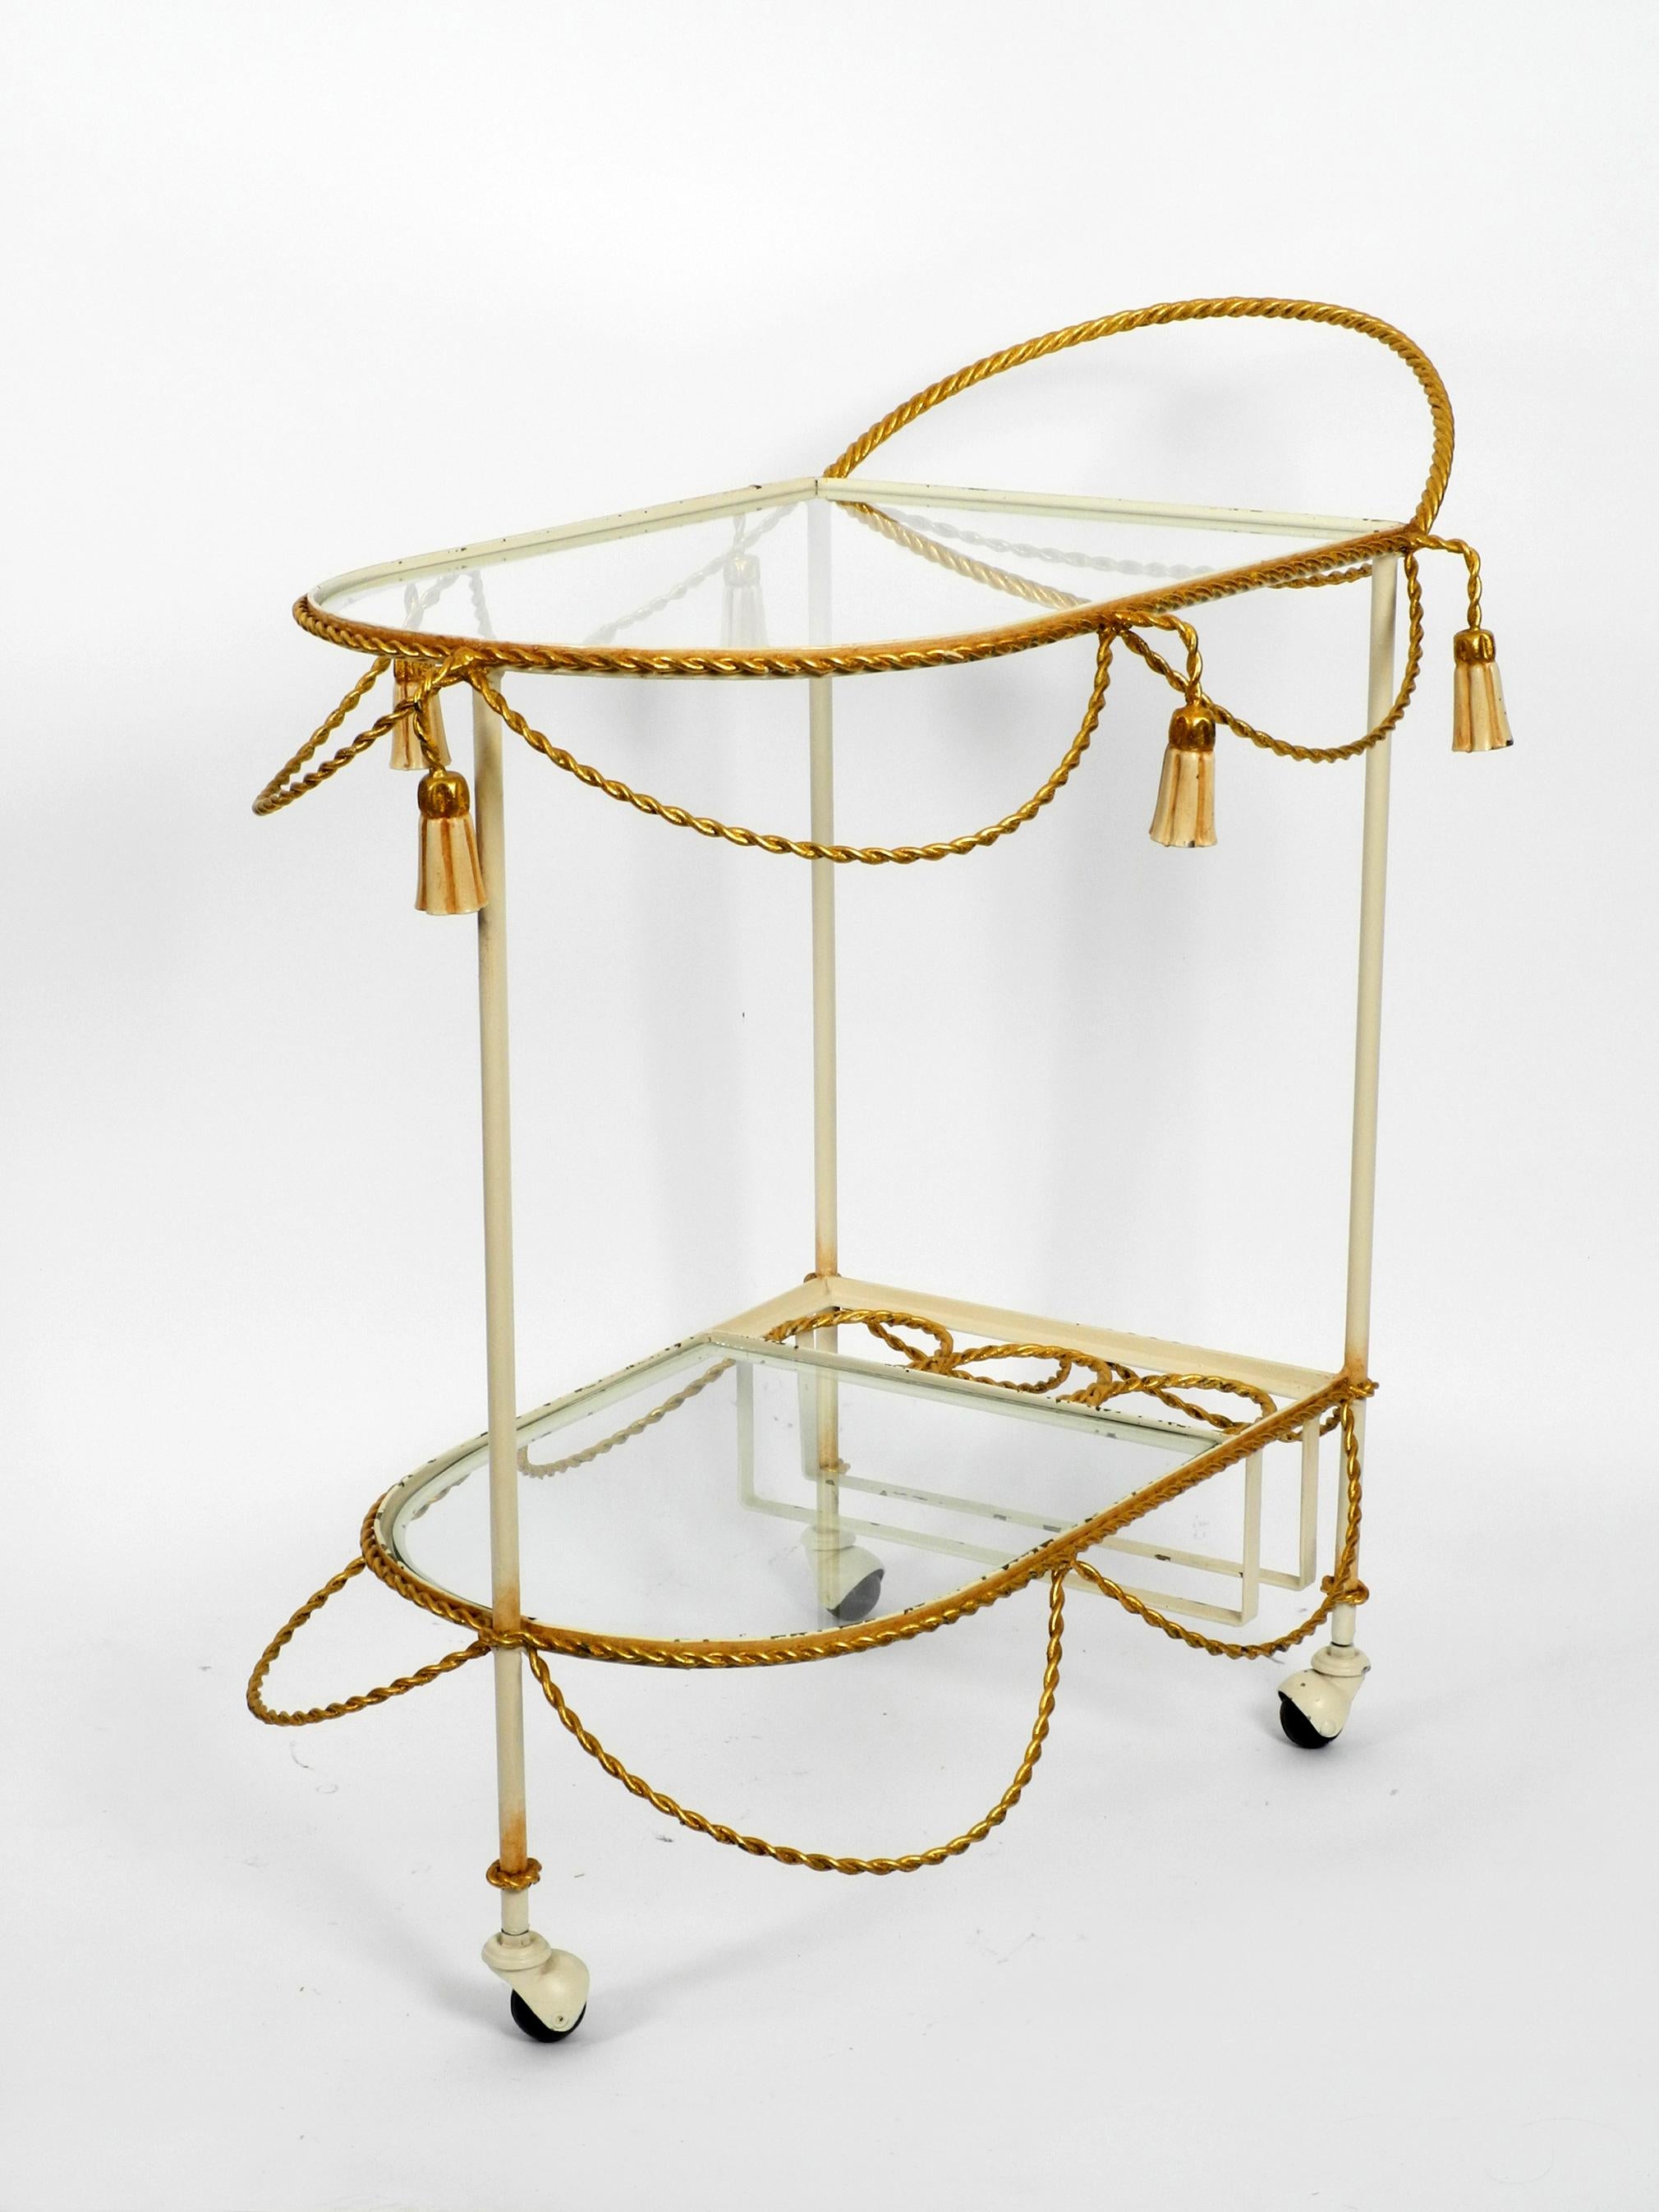 Hollywood Regency Italian Midcentury Bar Cart Made of Metal in Beige and Gold with Glass Elements For Sale